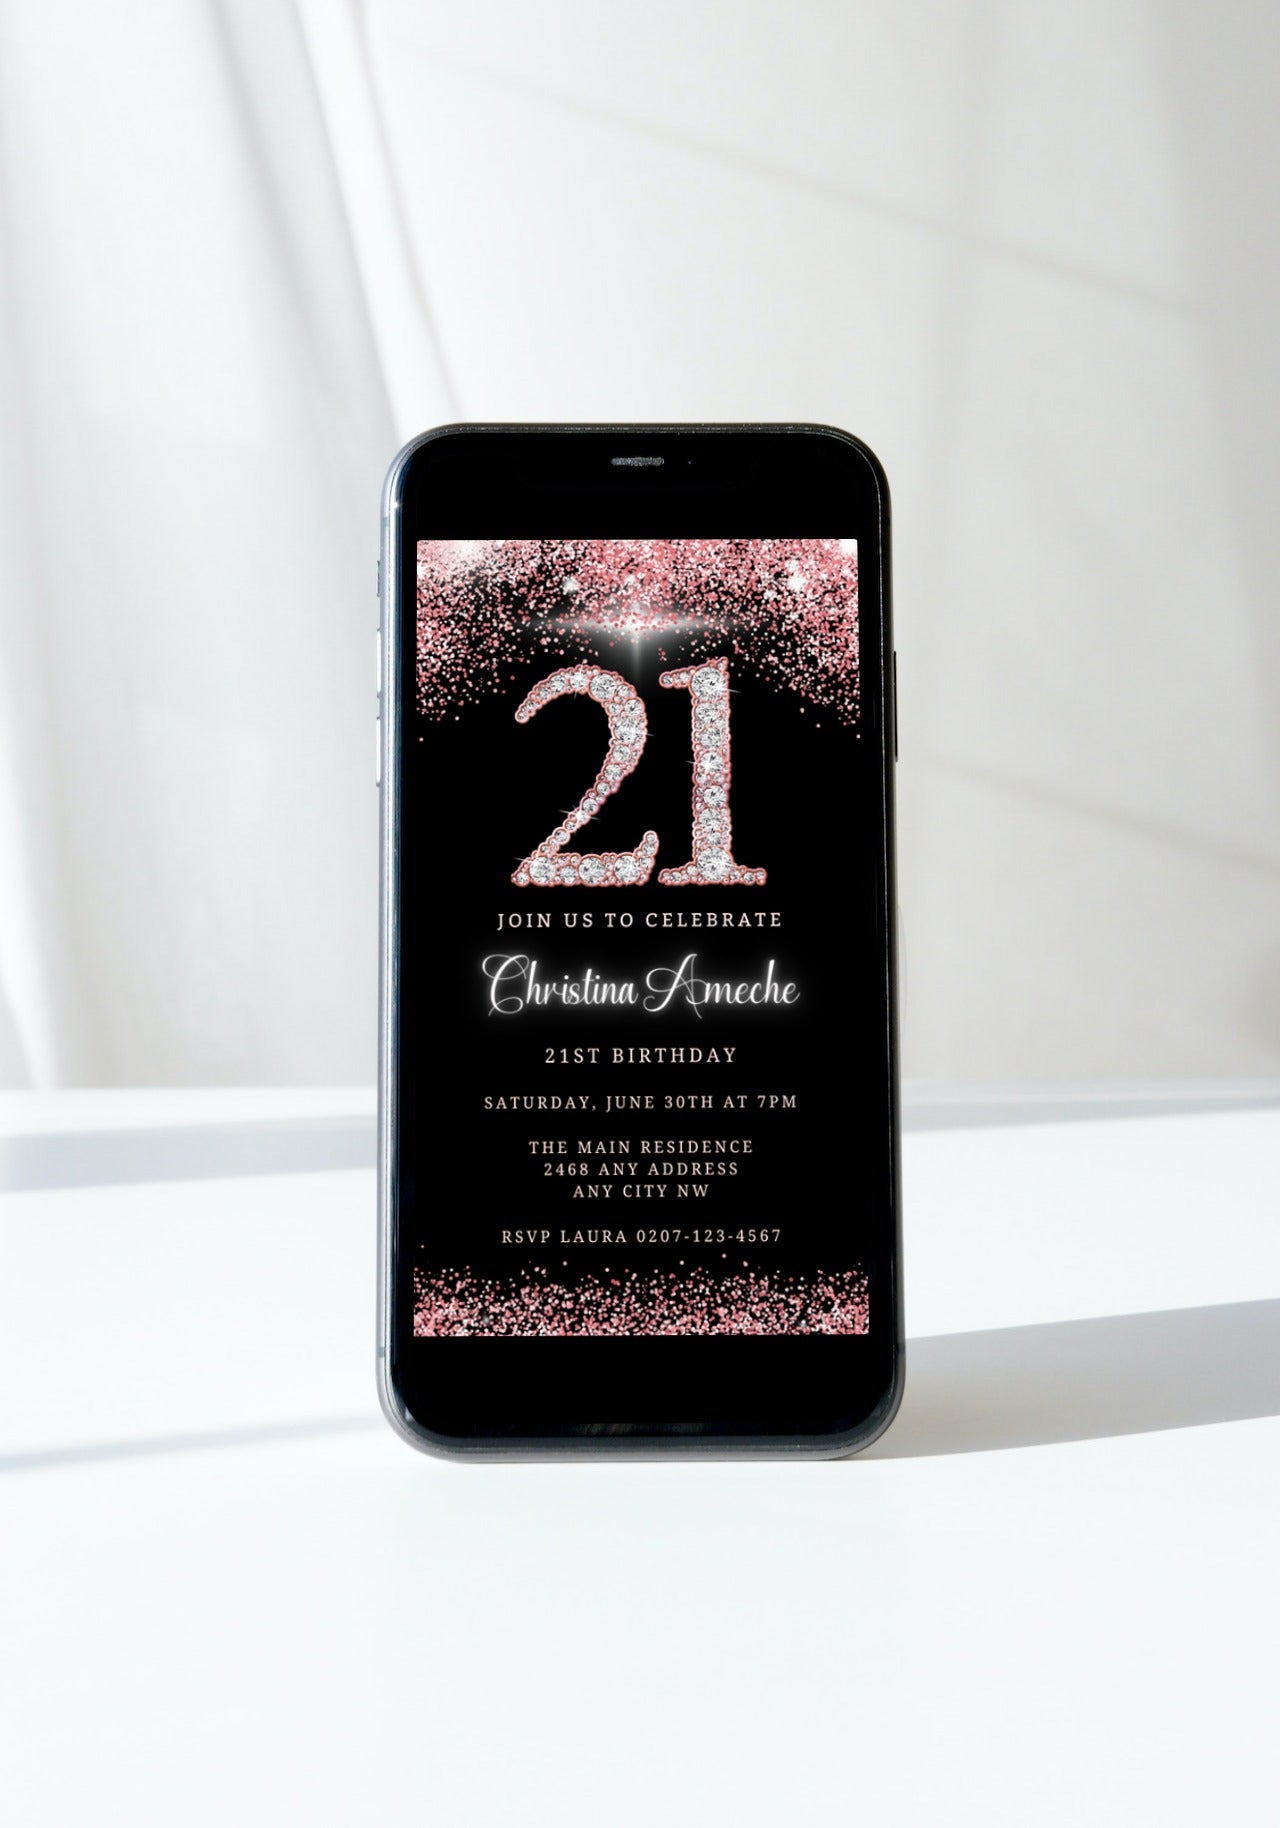 Cell phone displaying a customizable 21st birthday evite template with rose gold glitter and diamond design.